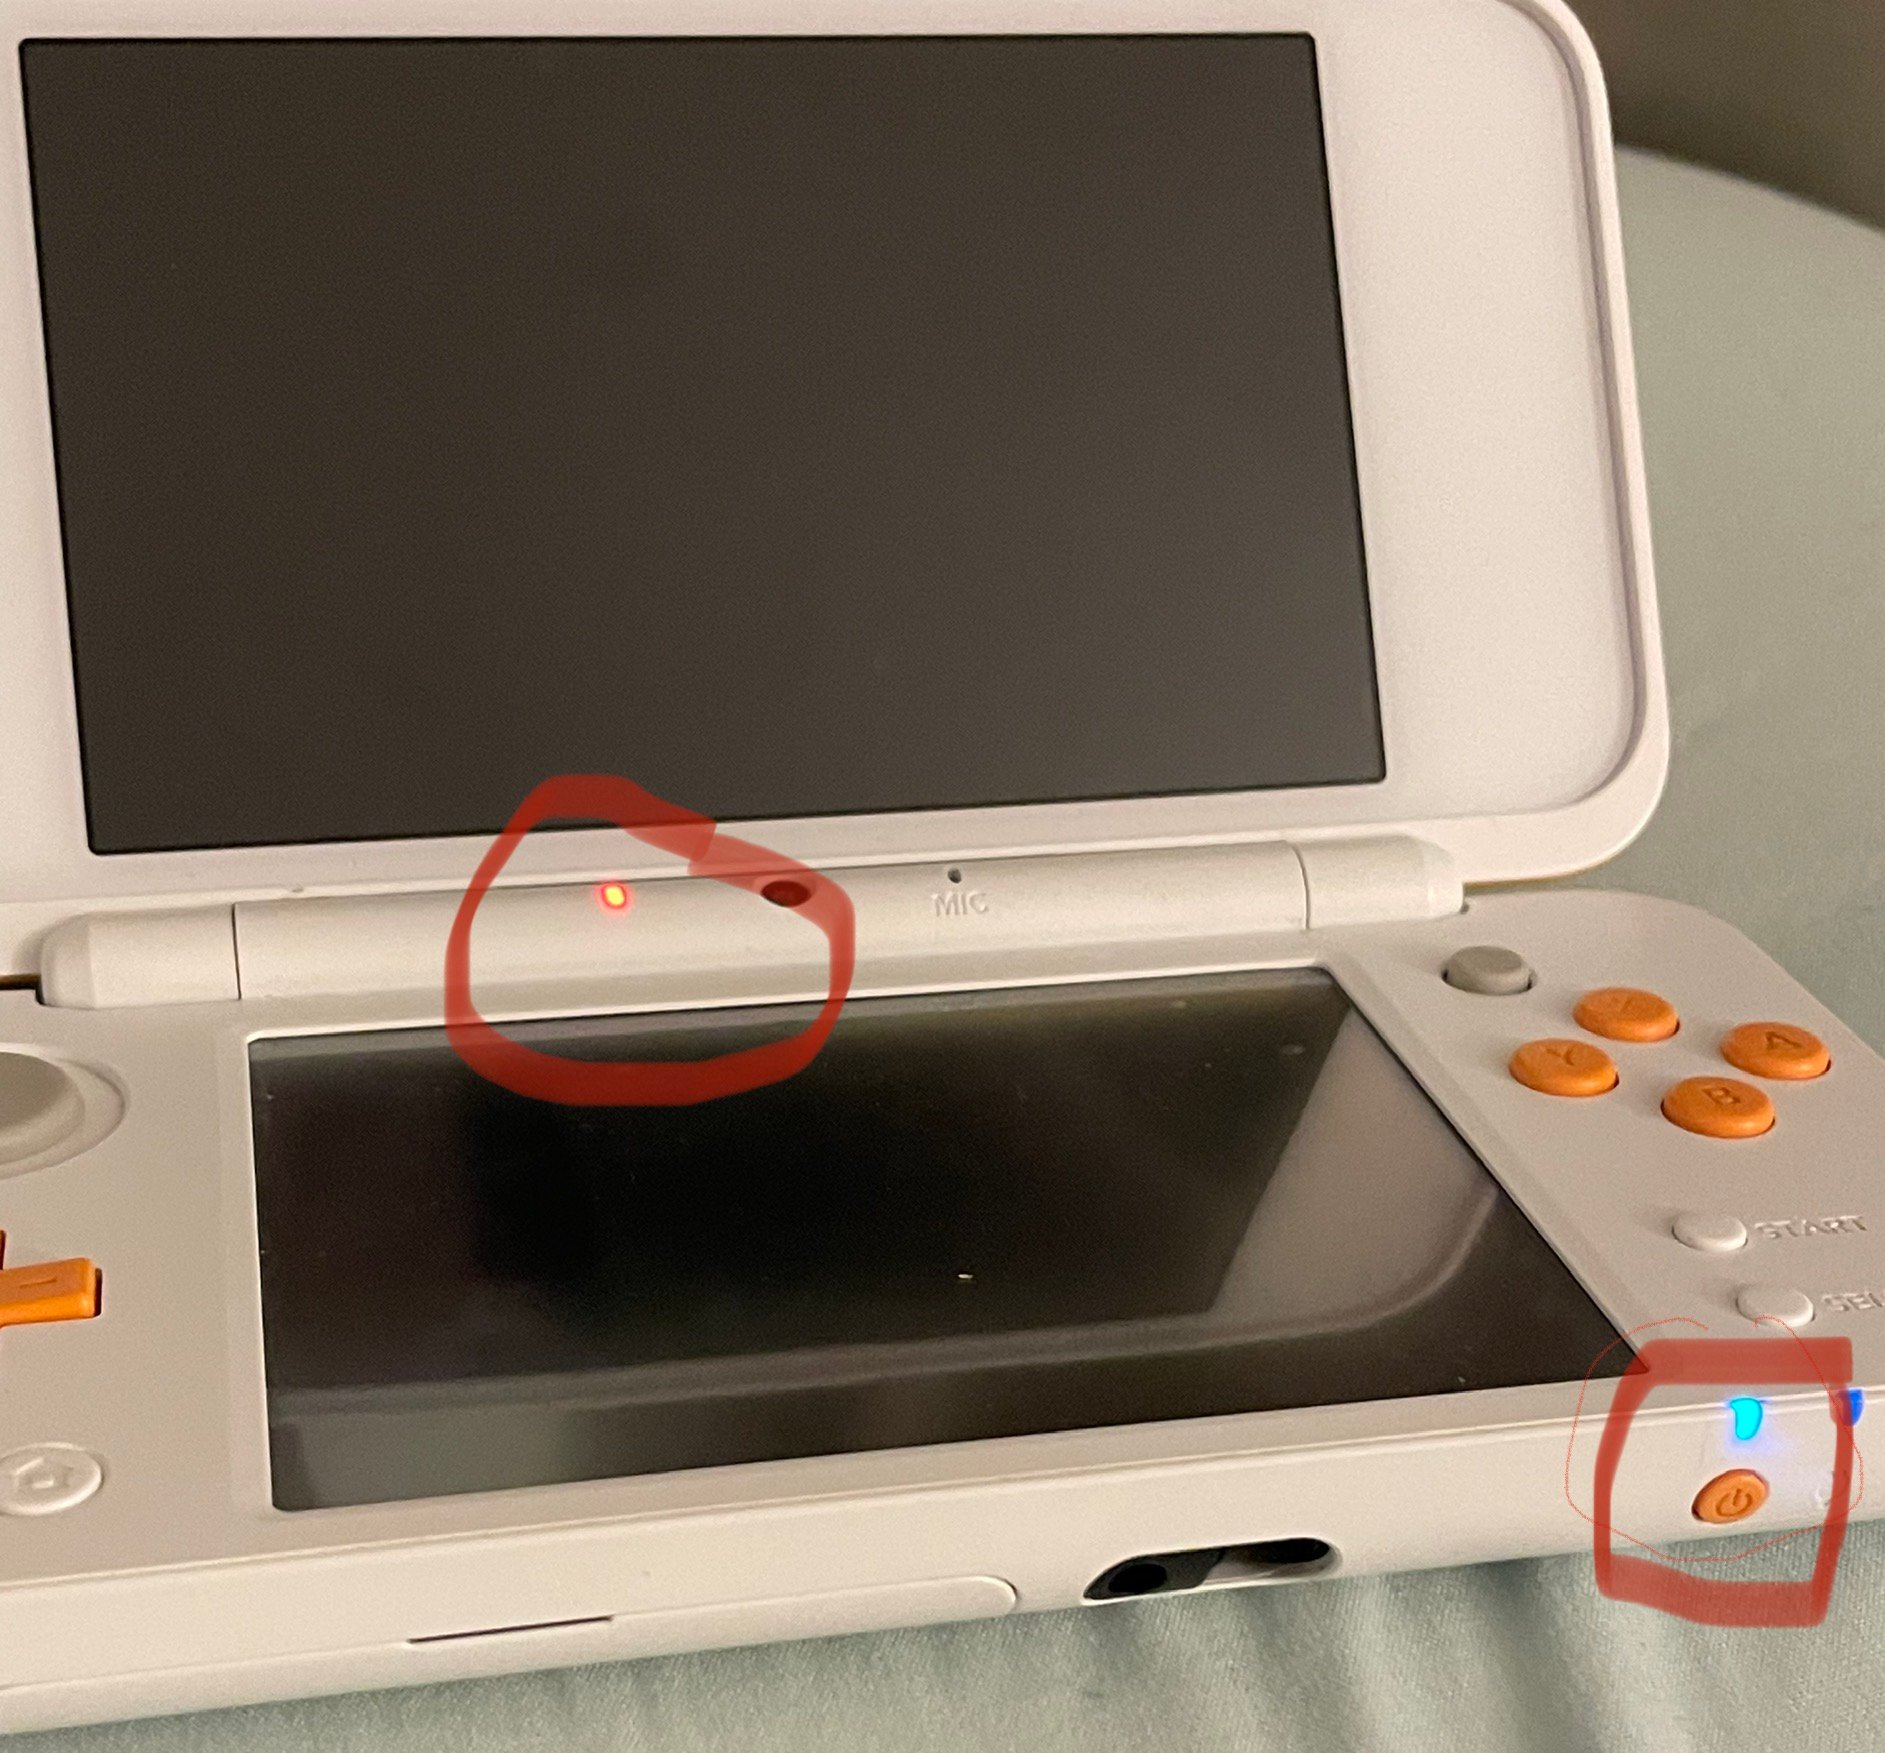 3DS Not Turning On | GBAtemp.net - The Independent Video Game Community